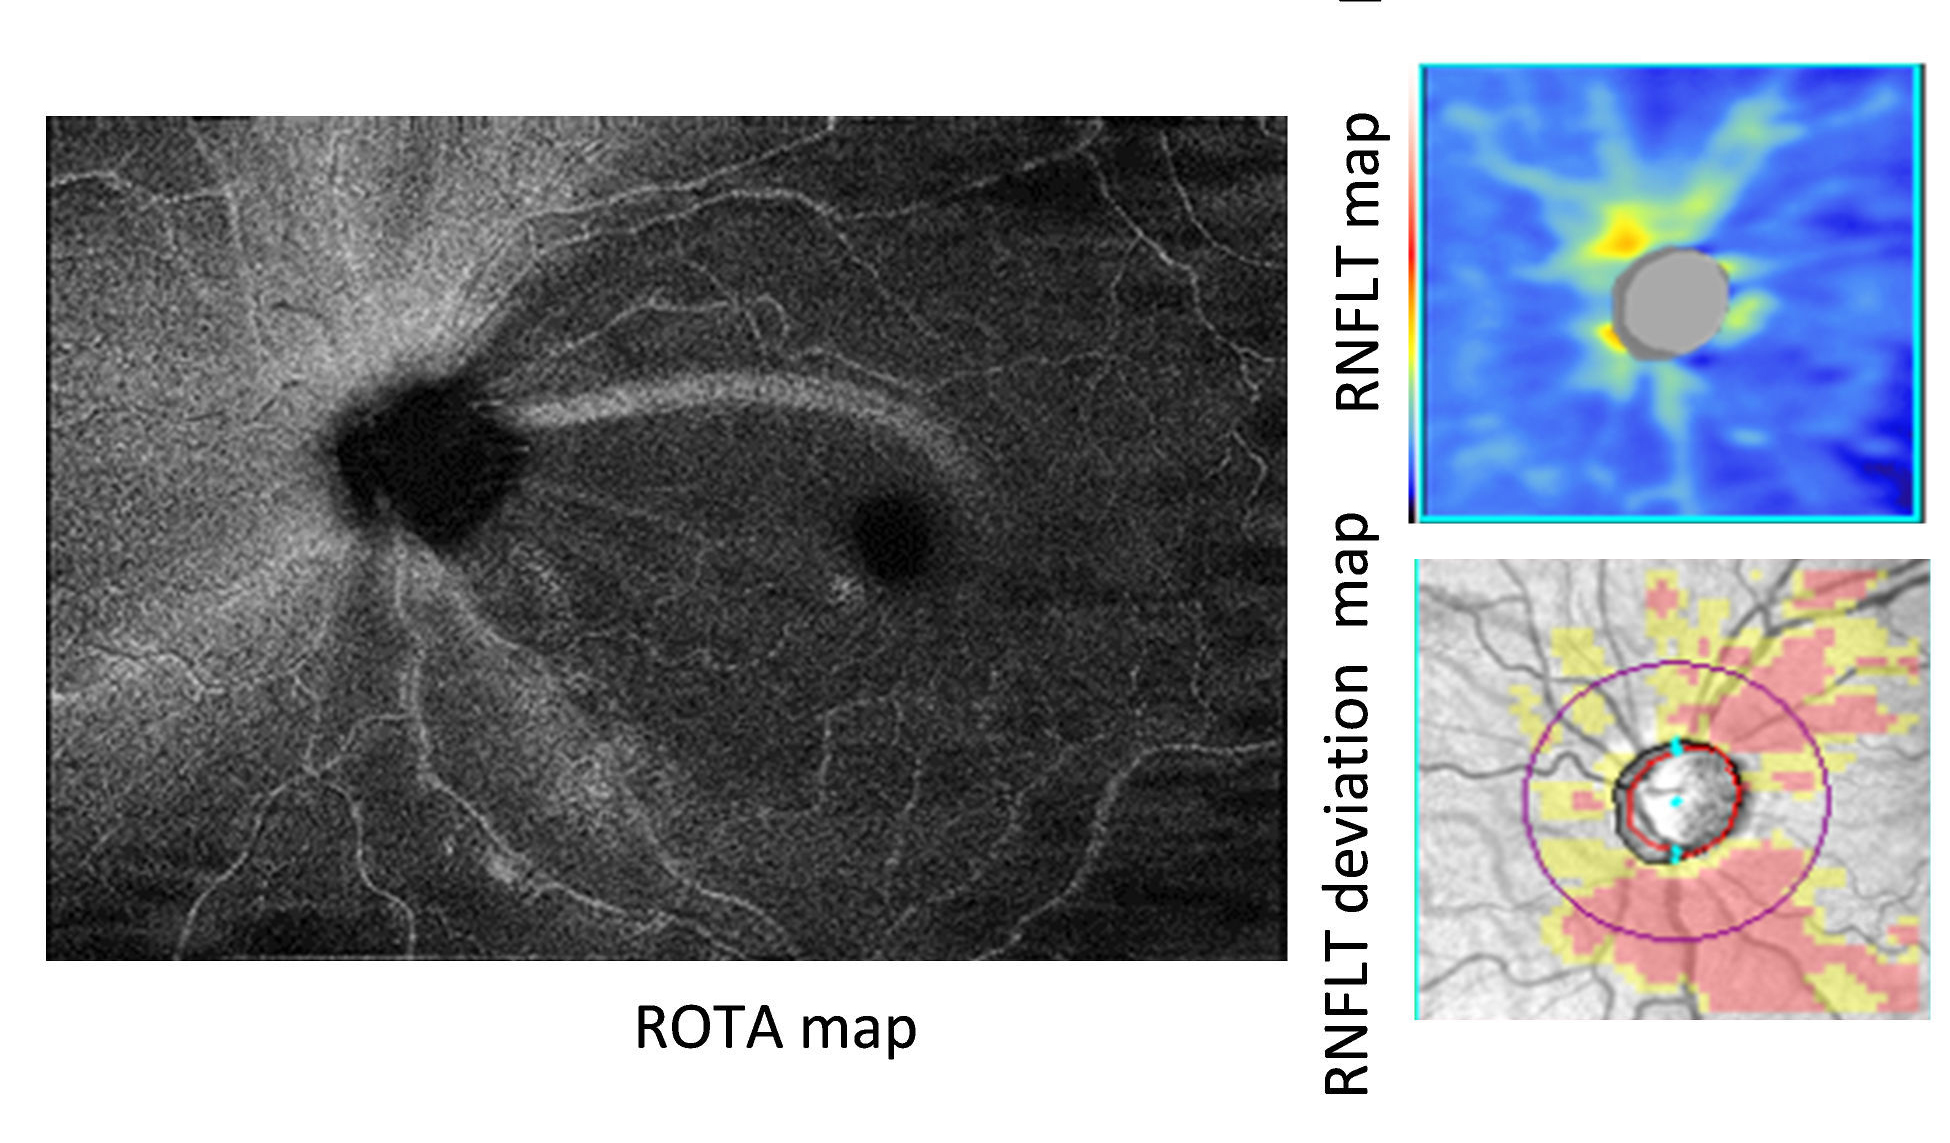 Papillomacular and papillofoveal RNFL bundle defects were a common finding in eyes with glaucoma in this study with prevalence rates of 92.1% and 37.9%, respectively.